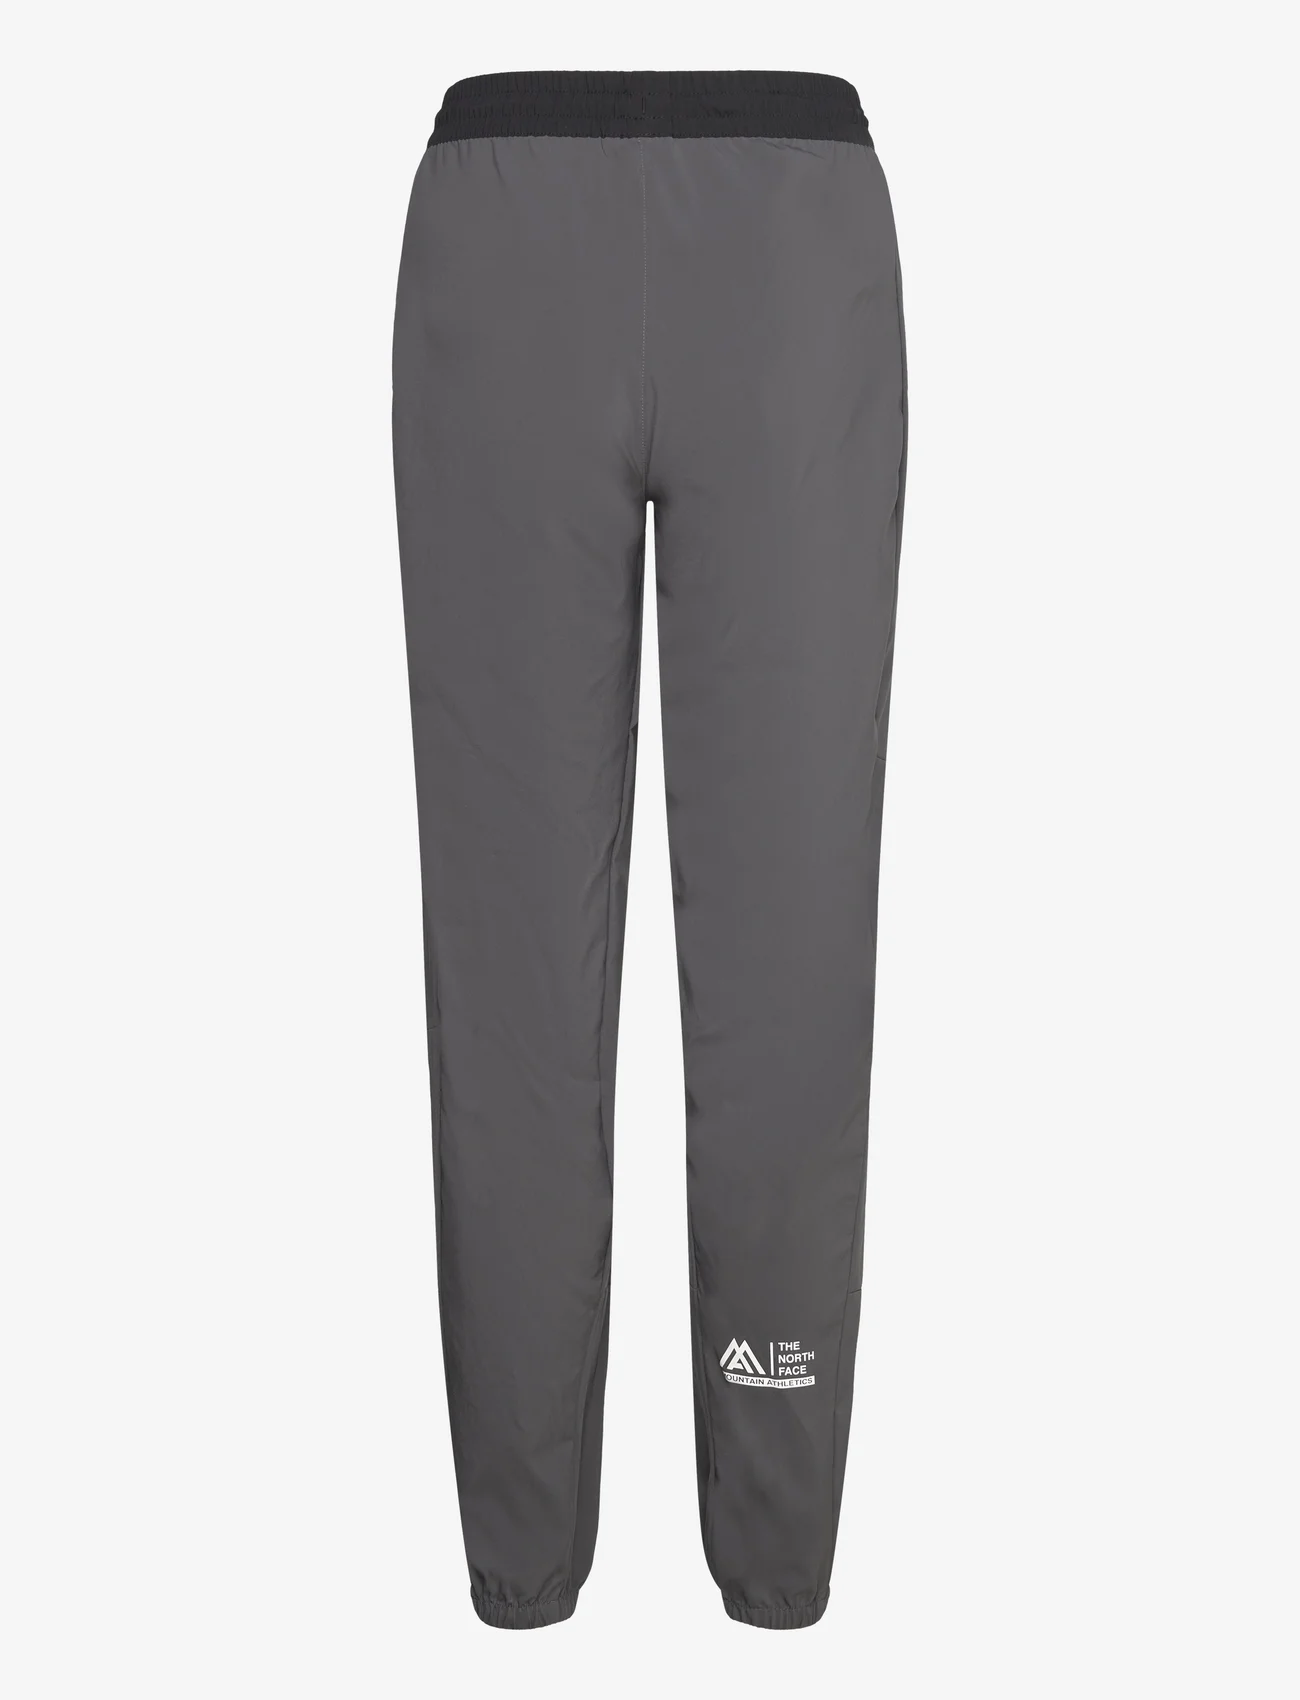 The North Face - W MA WIND TRACK PANT - træningsbukser - anthracite grey/tnf bla - 1